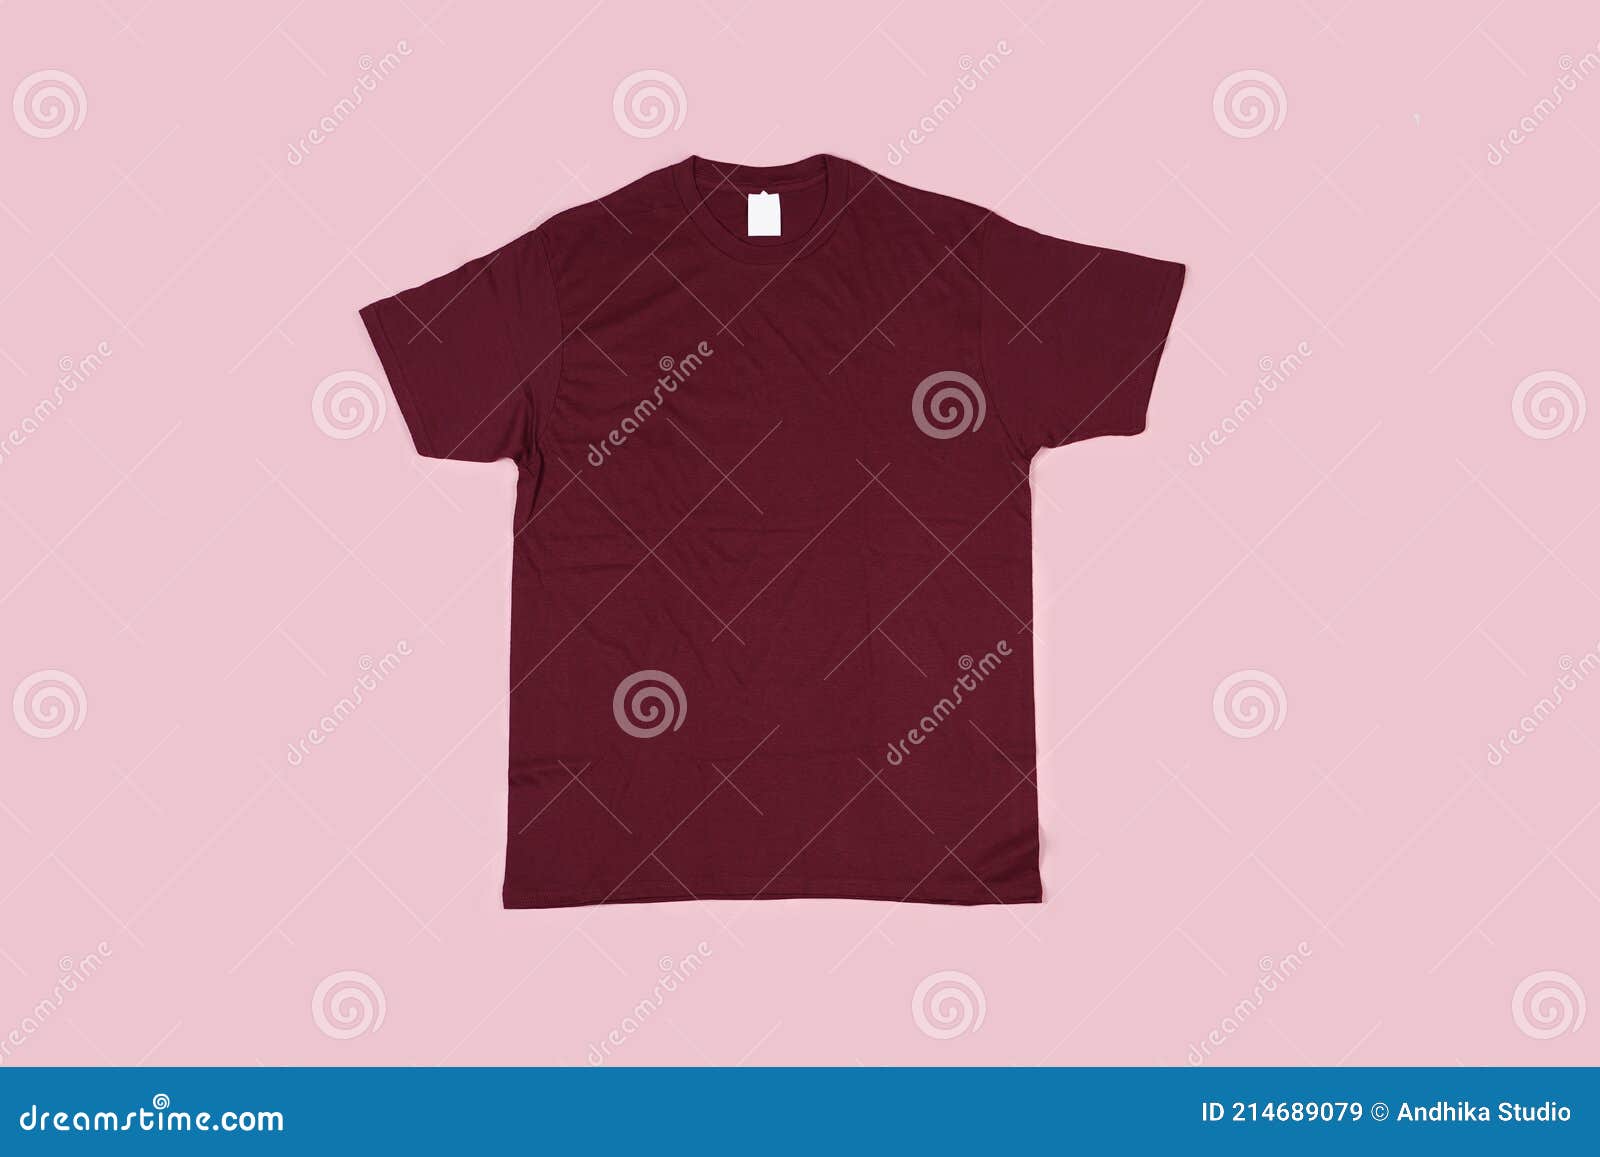 Download Blank Maroon Shirt Mockup Template Front And Back Views Isolated On A Pink T Shirt Mockup Stock Image Image Of Mockup Background 214689079